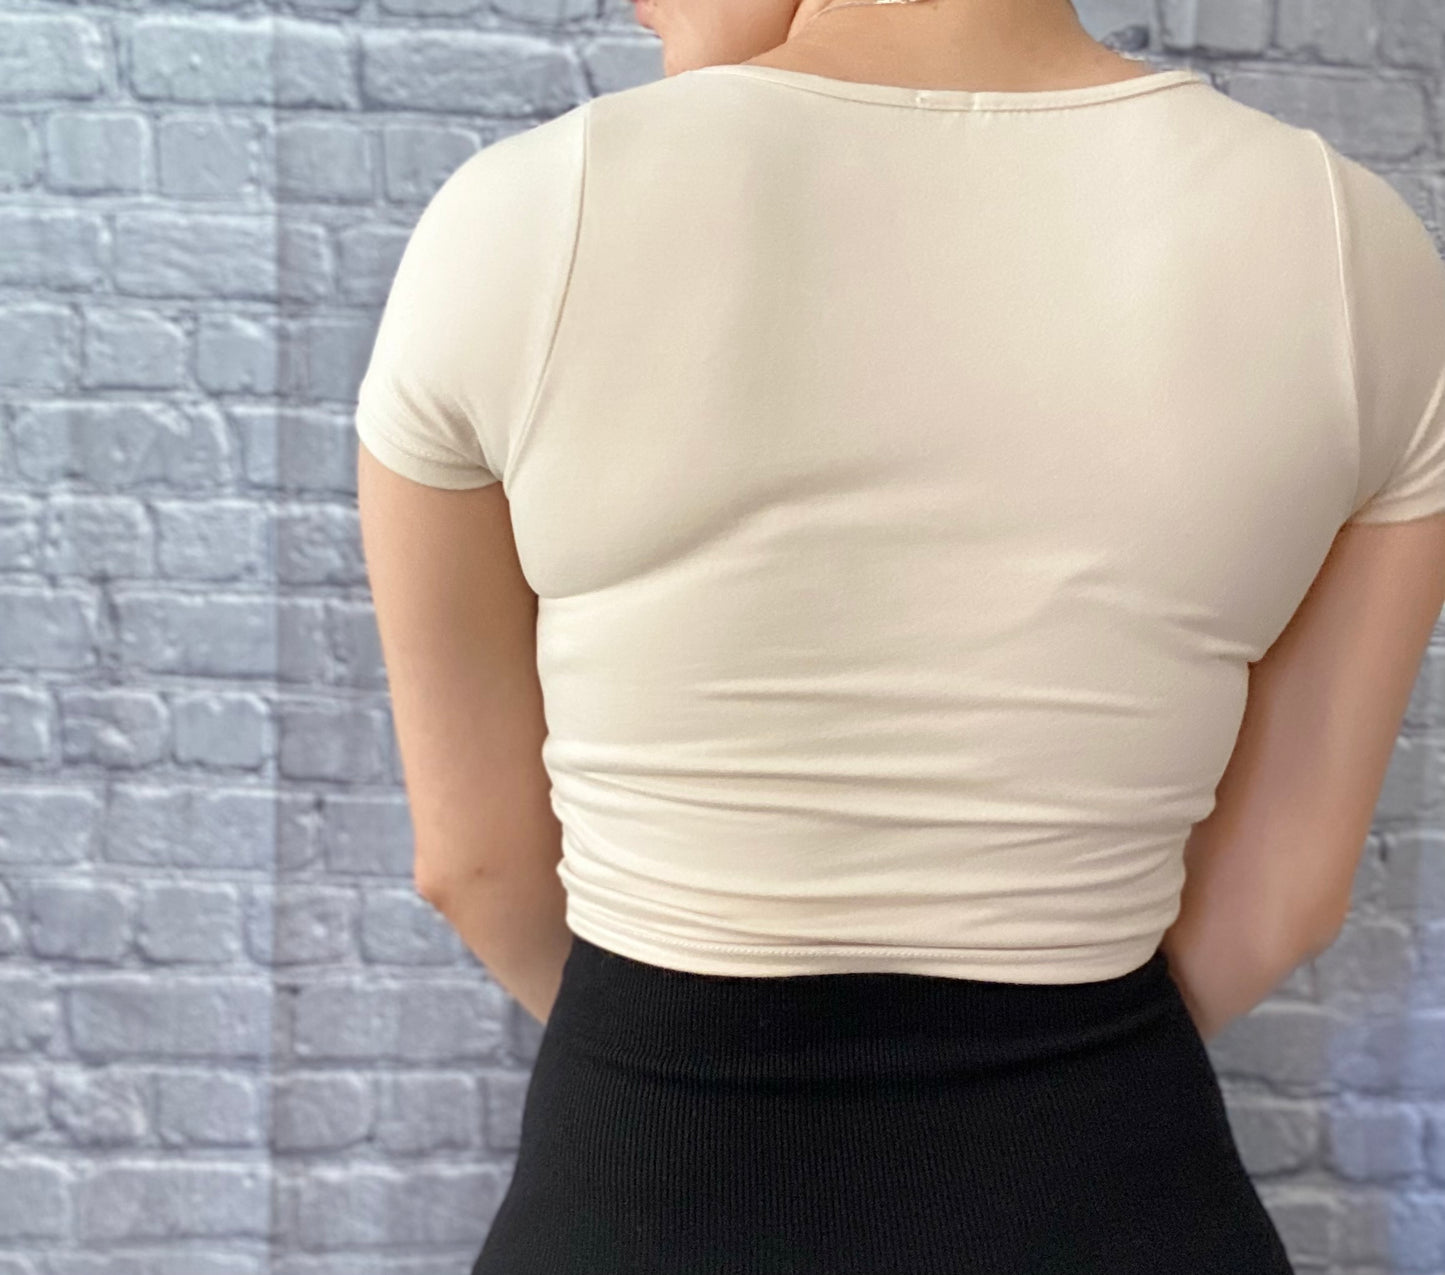 classic basic cream crop with double layered fabric